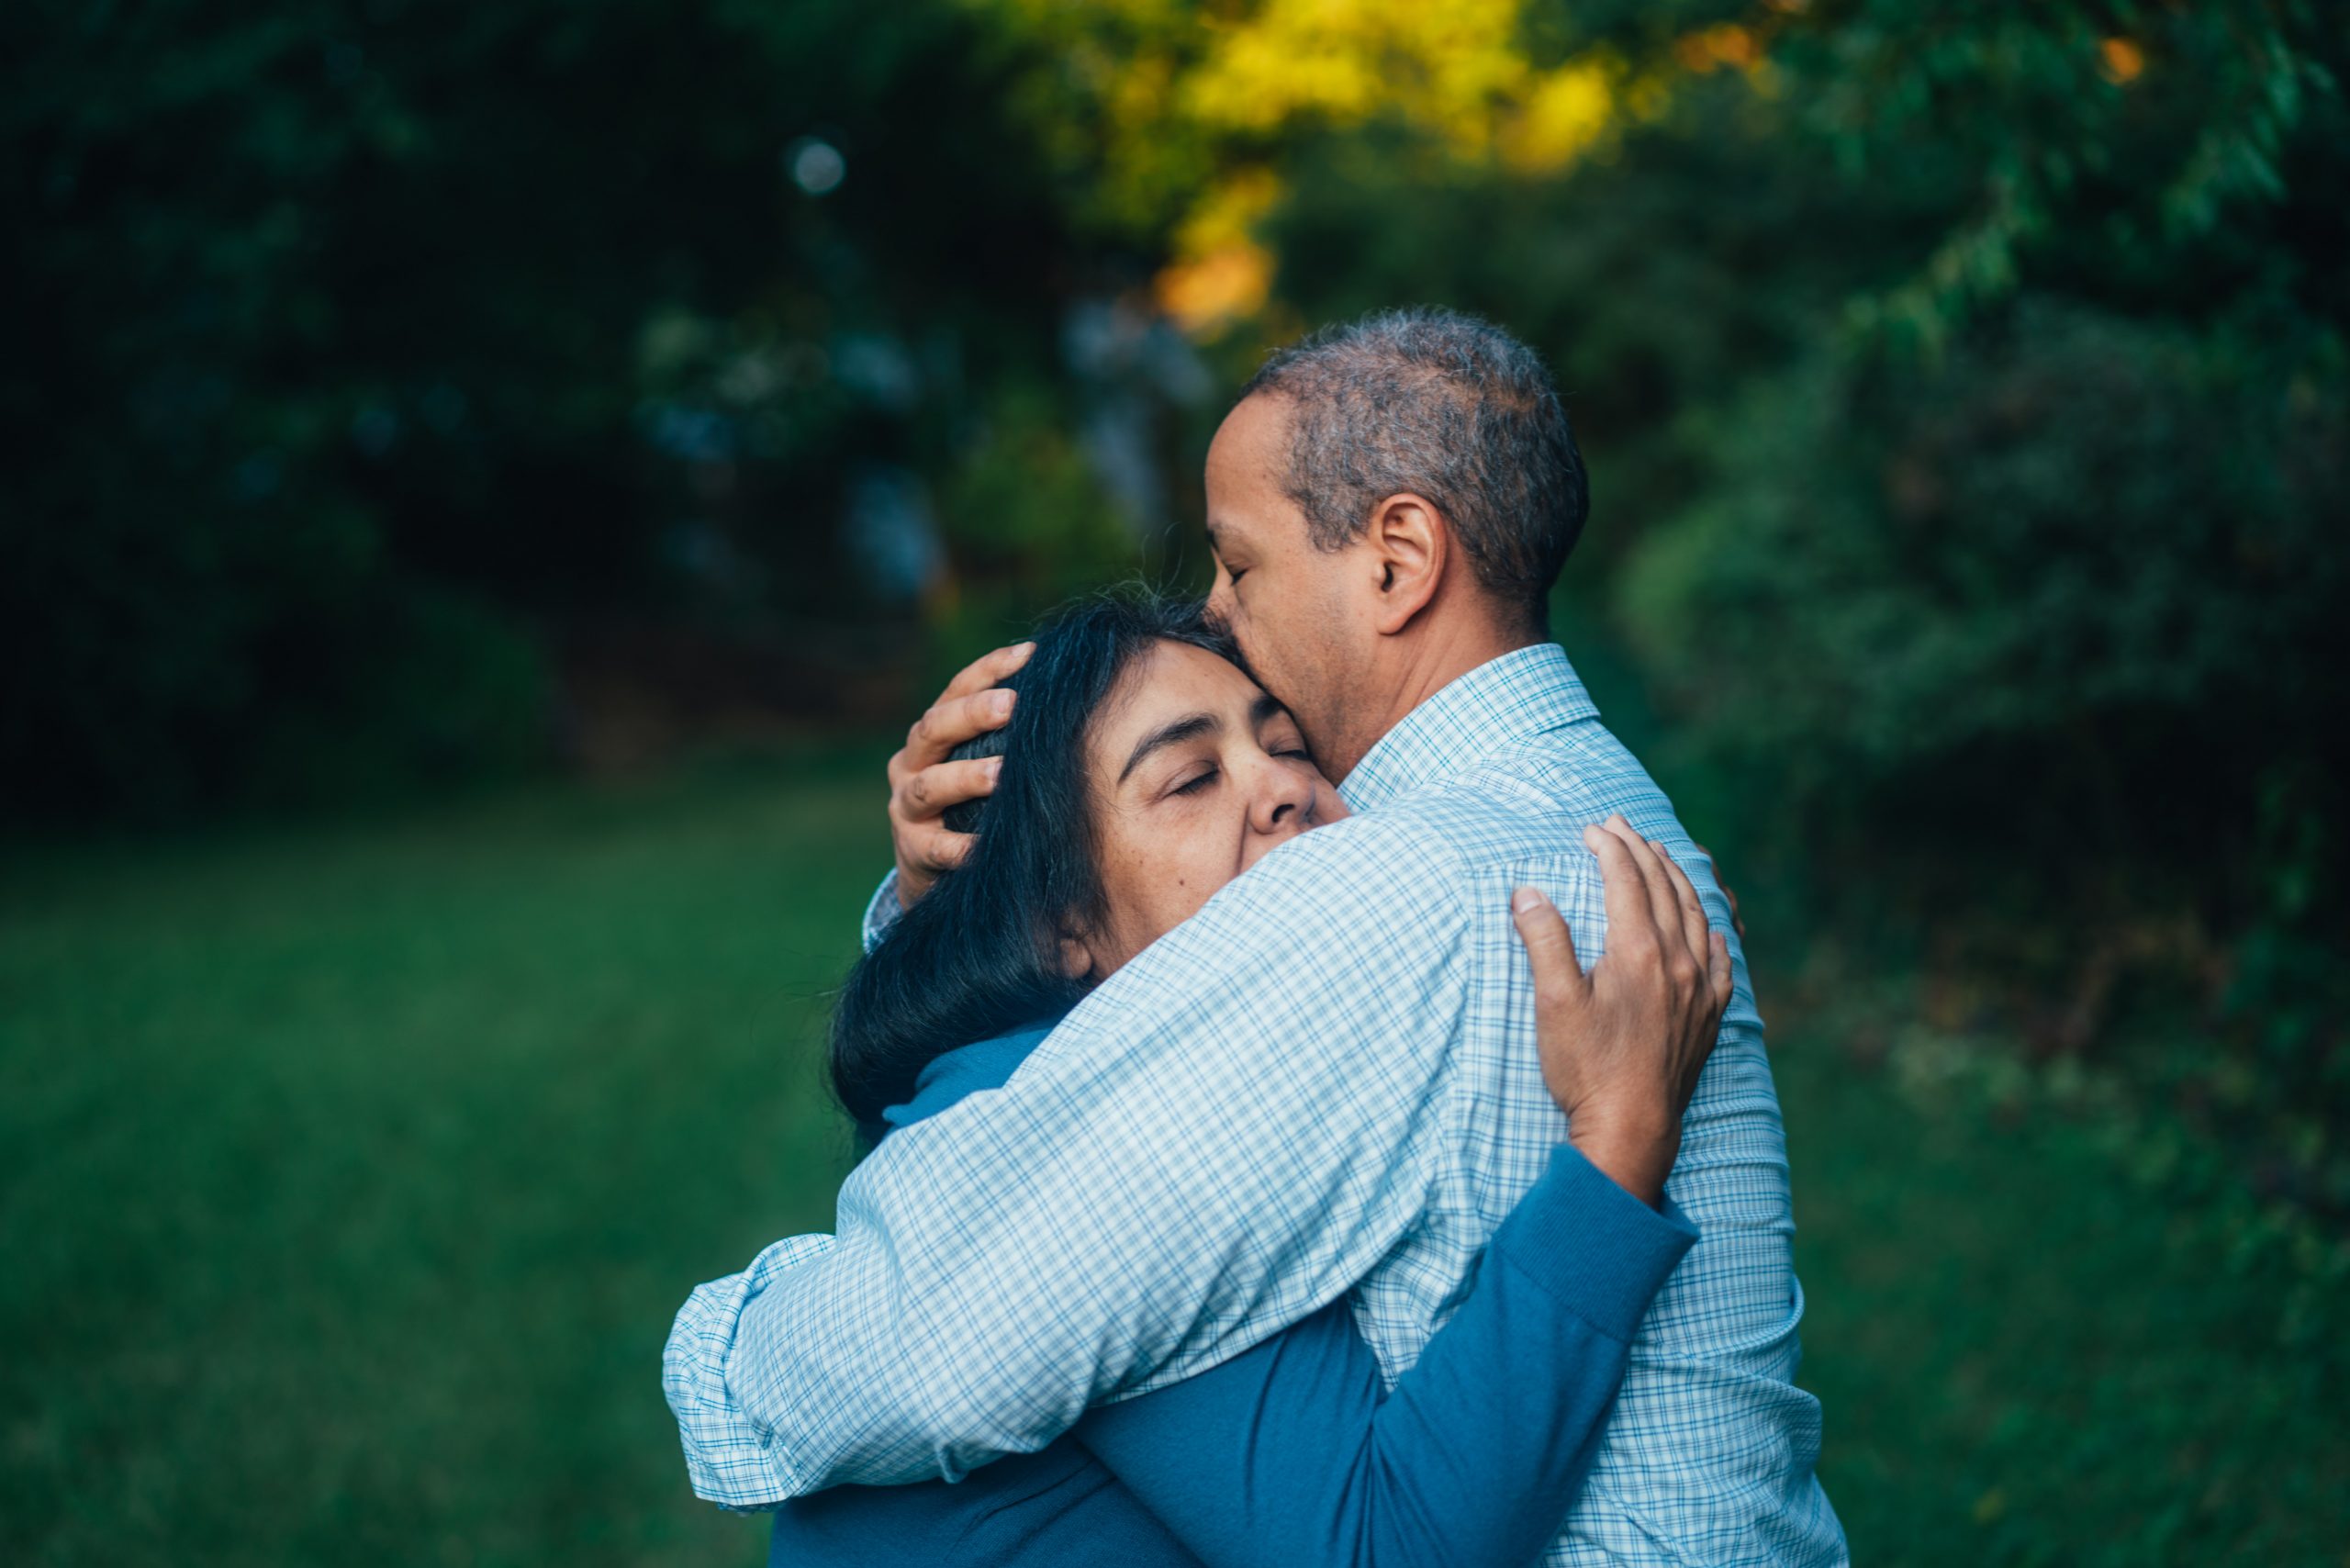 A middle aged Black couple embrace in a garden